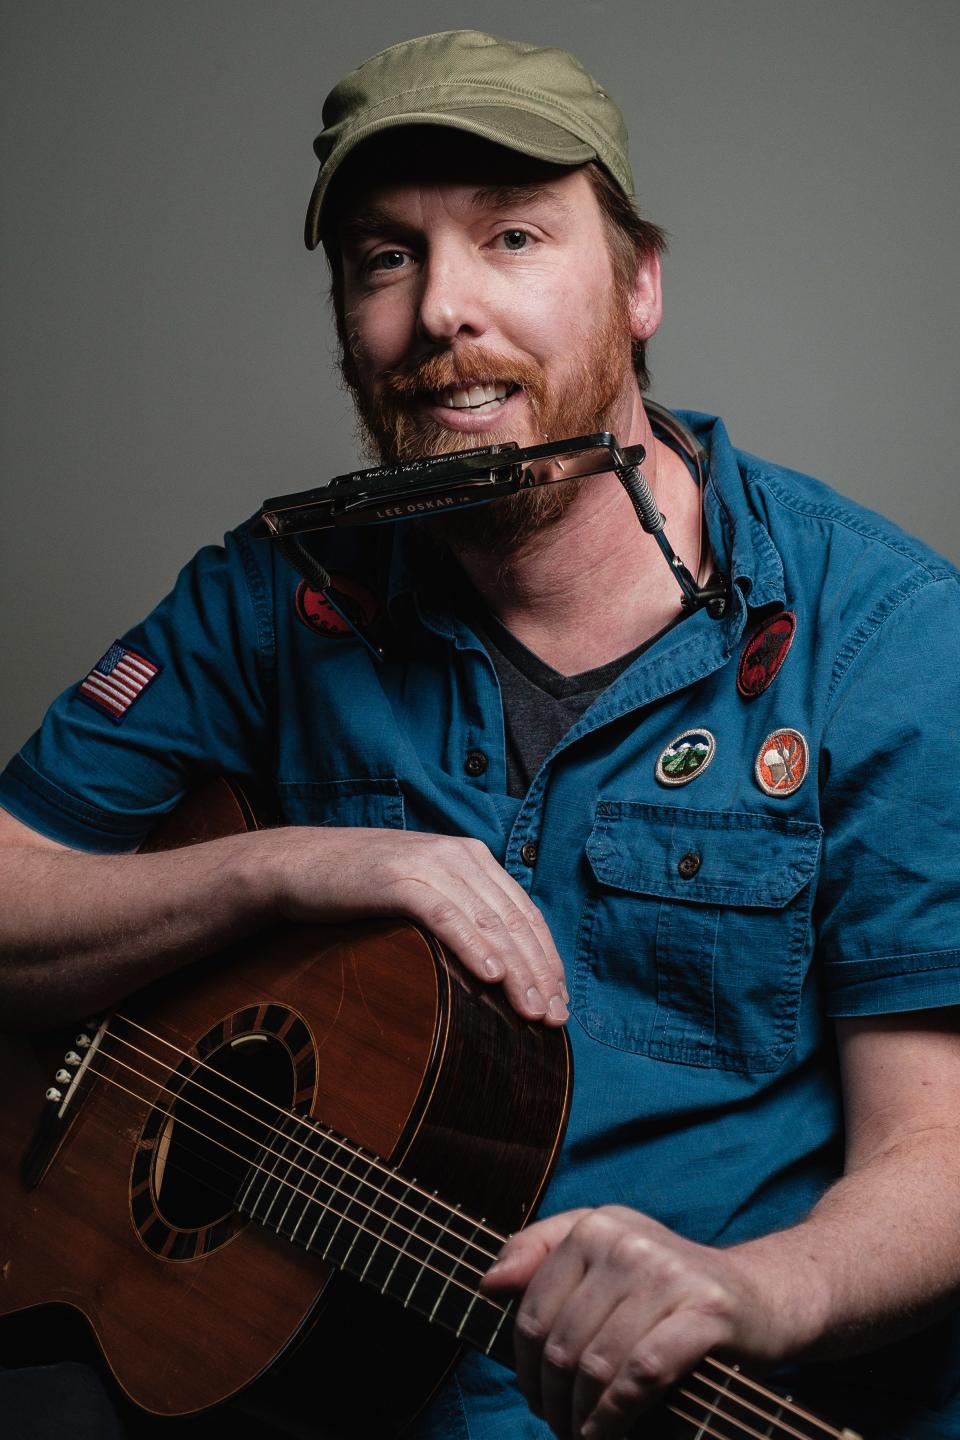 Josh Compton is a singer, songwriter and teacher in Tuscarawas County. He recently released an album, "The Big Trail and Other Ballads of the Tuscarawas," which highlights the county's history.